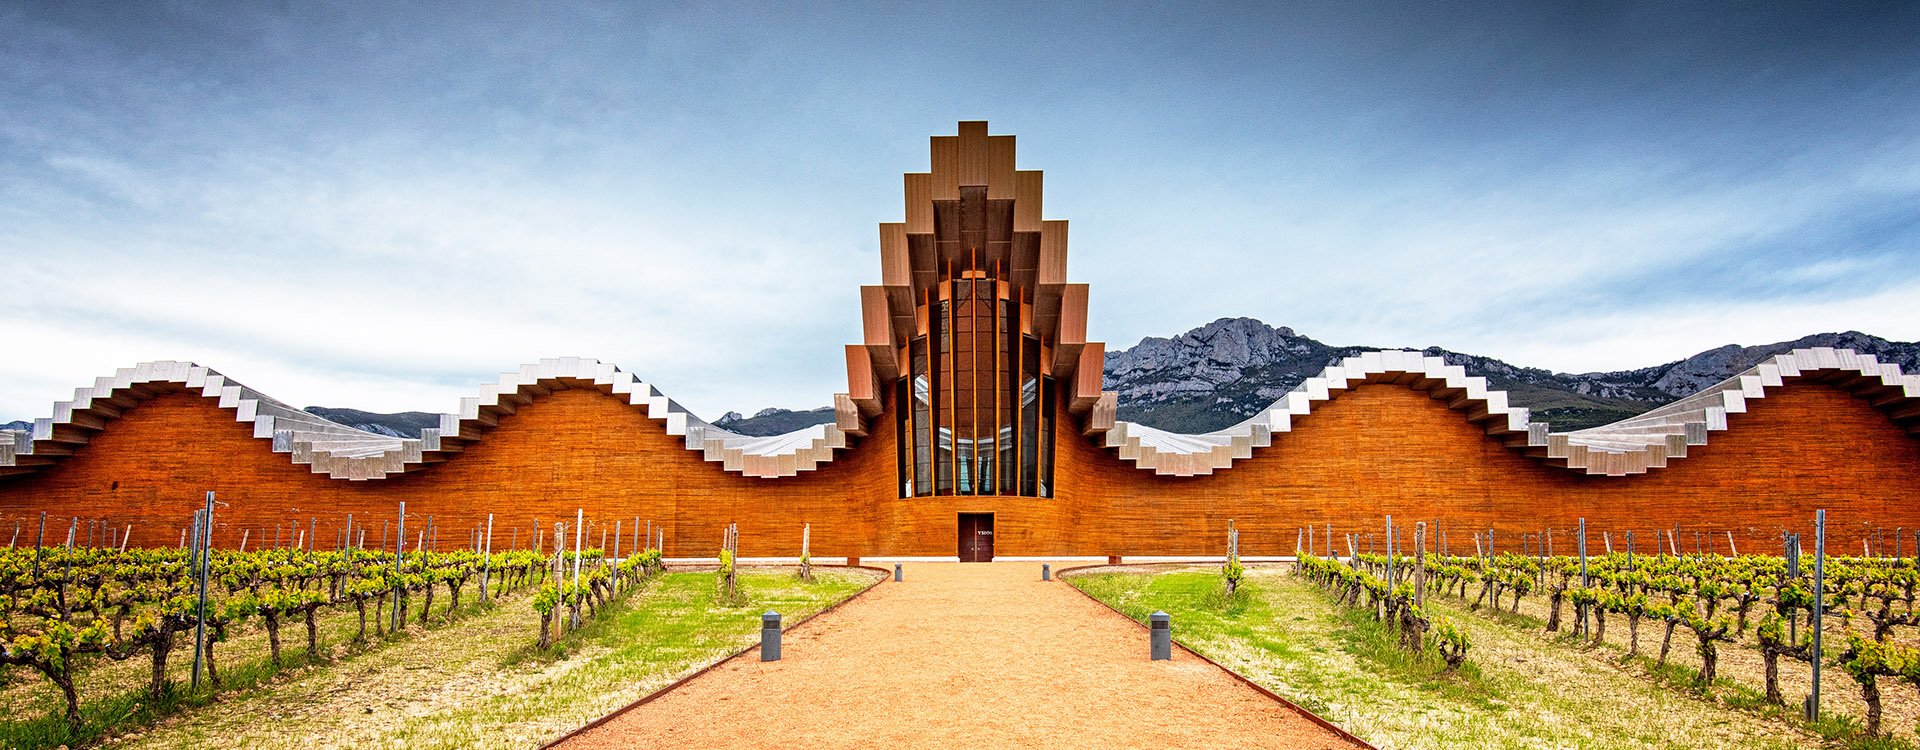 The modern winery of Ysios in Laguardia, Basque Country, Spain, designed by Santiago Calatrava, built in 2001